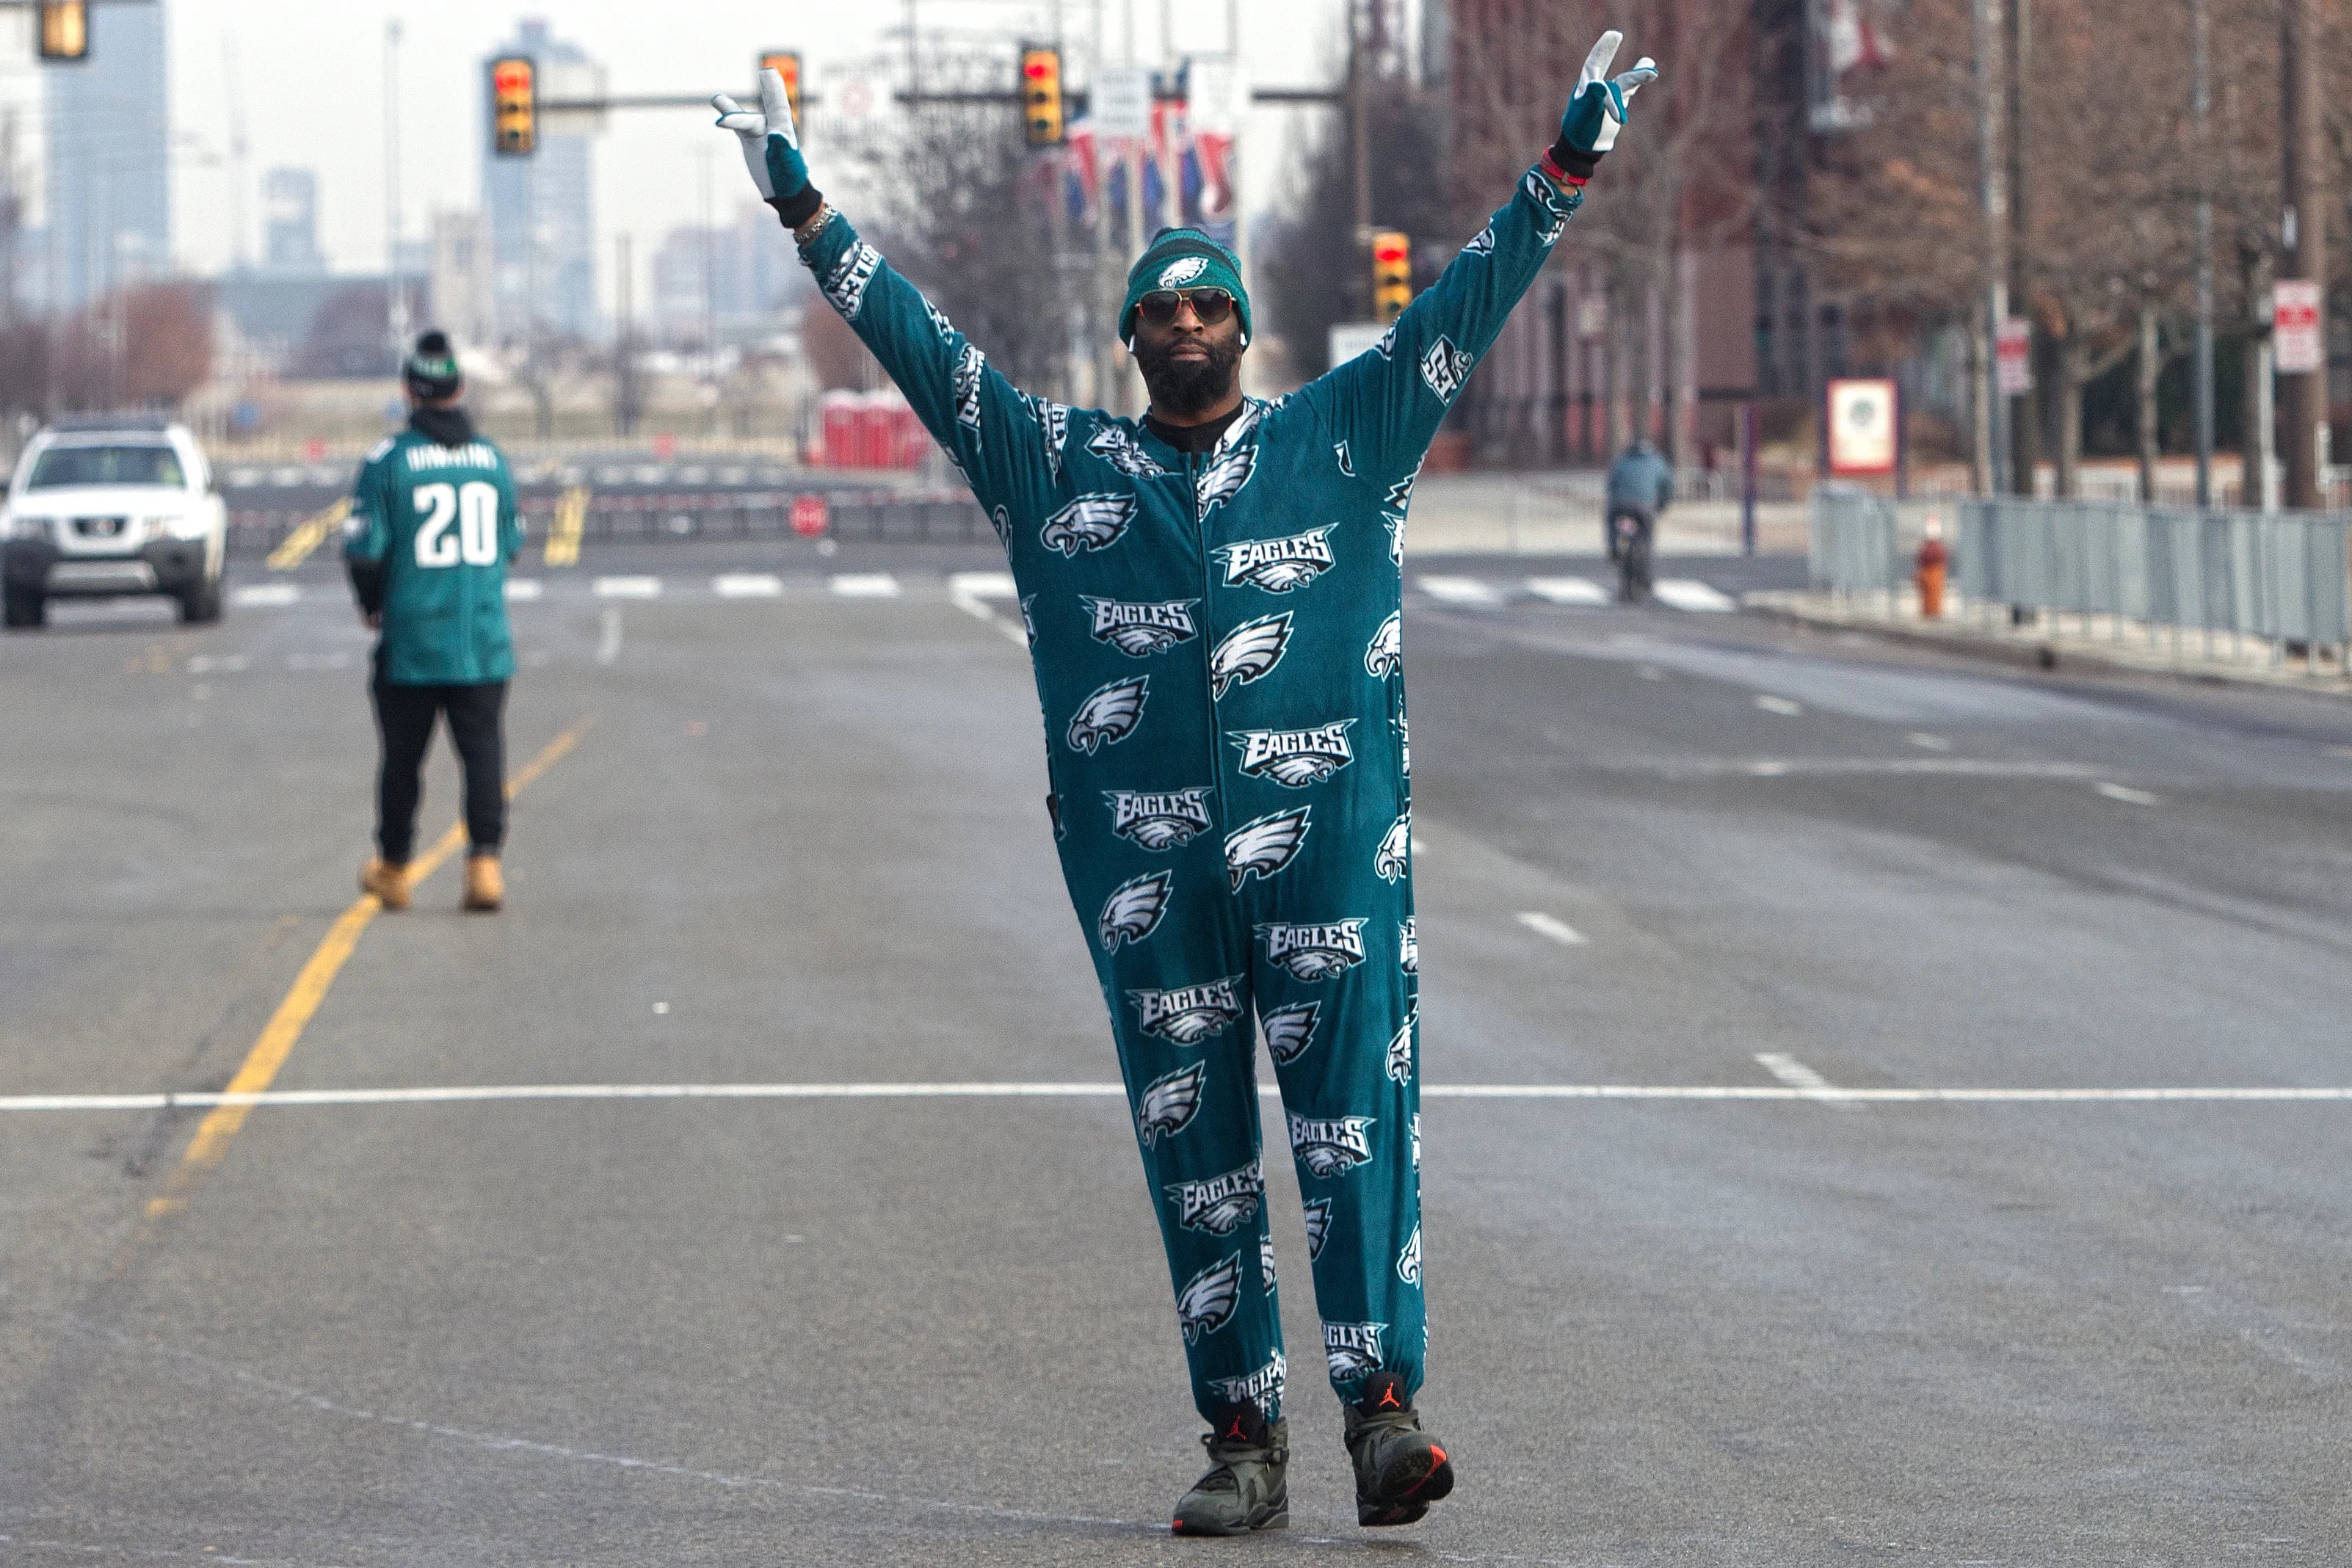 Eagles faithful start the party early and want one more - at the